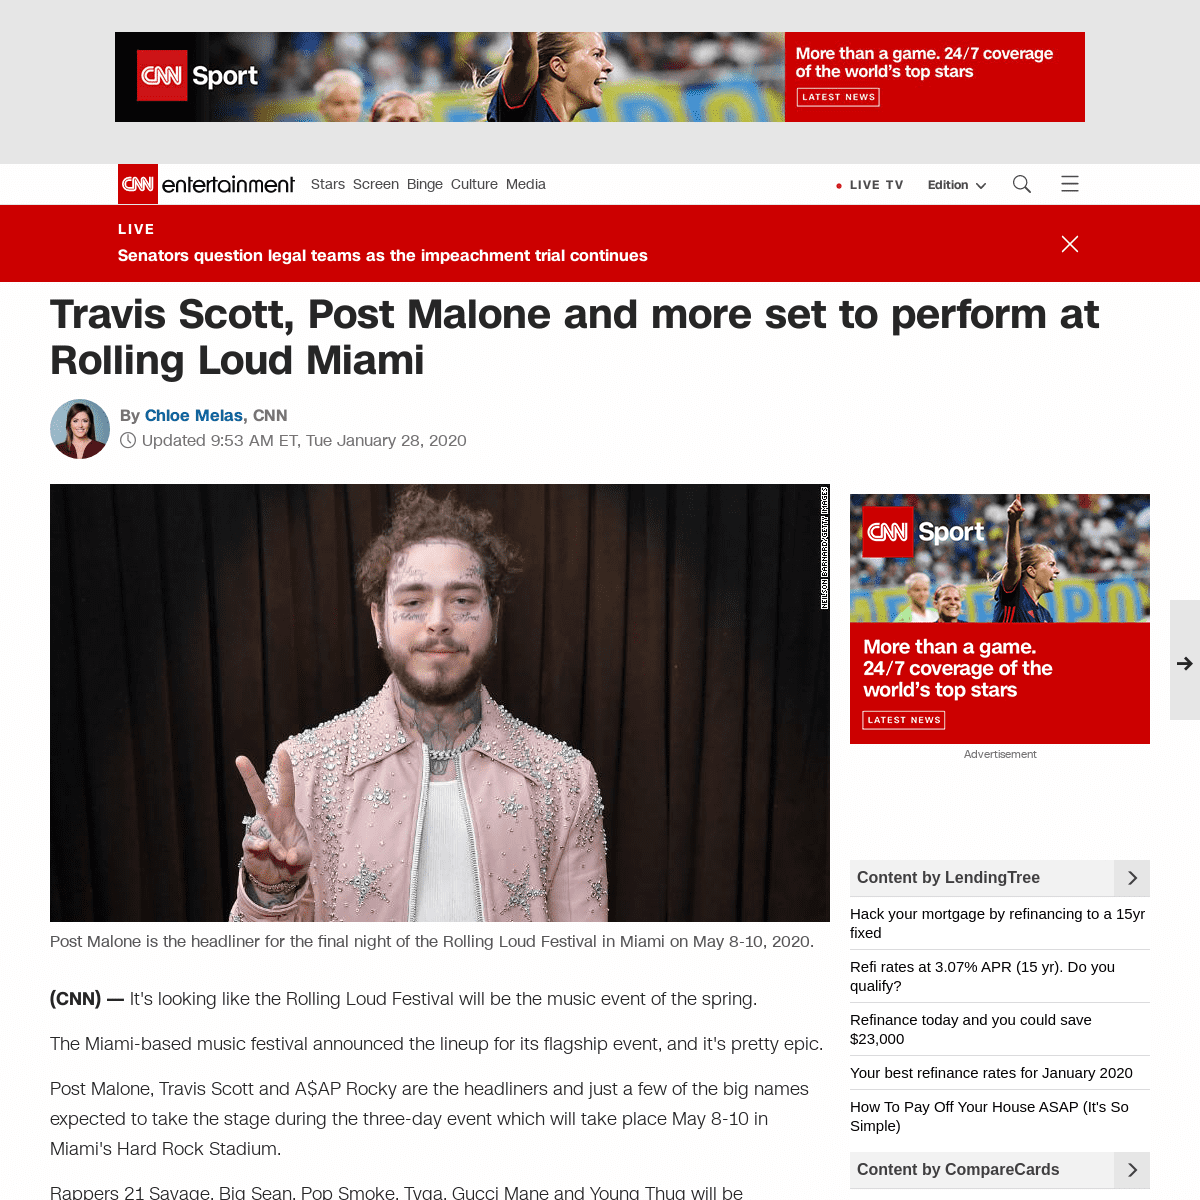 A complete backup of www.cnn.com/2020/01/28/entertainment/rolling-loud-miami-2020-lineup/index.html